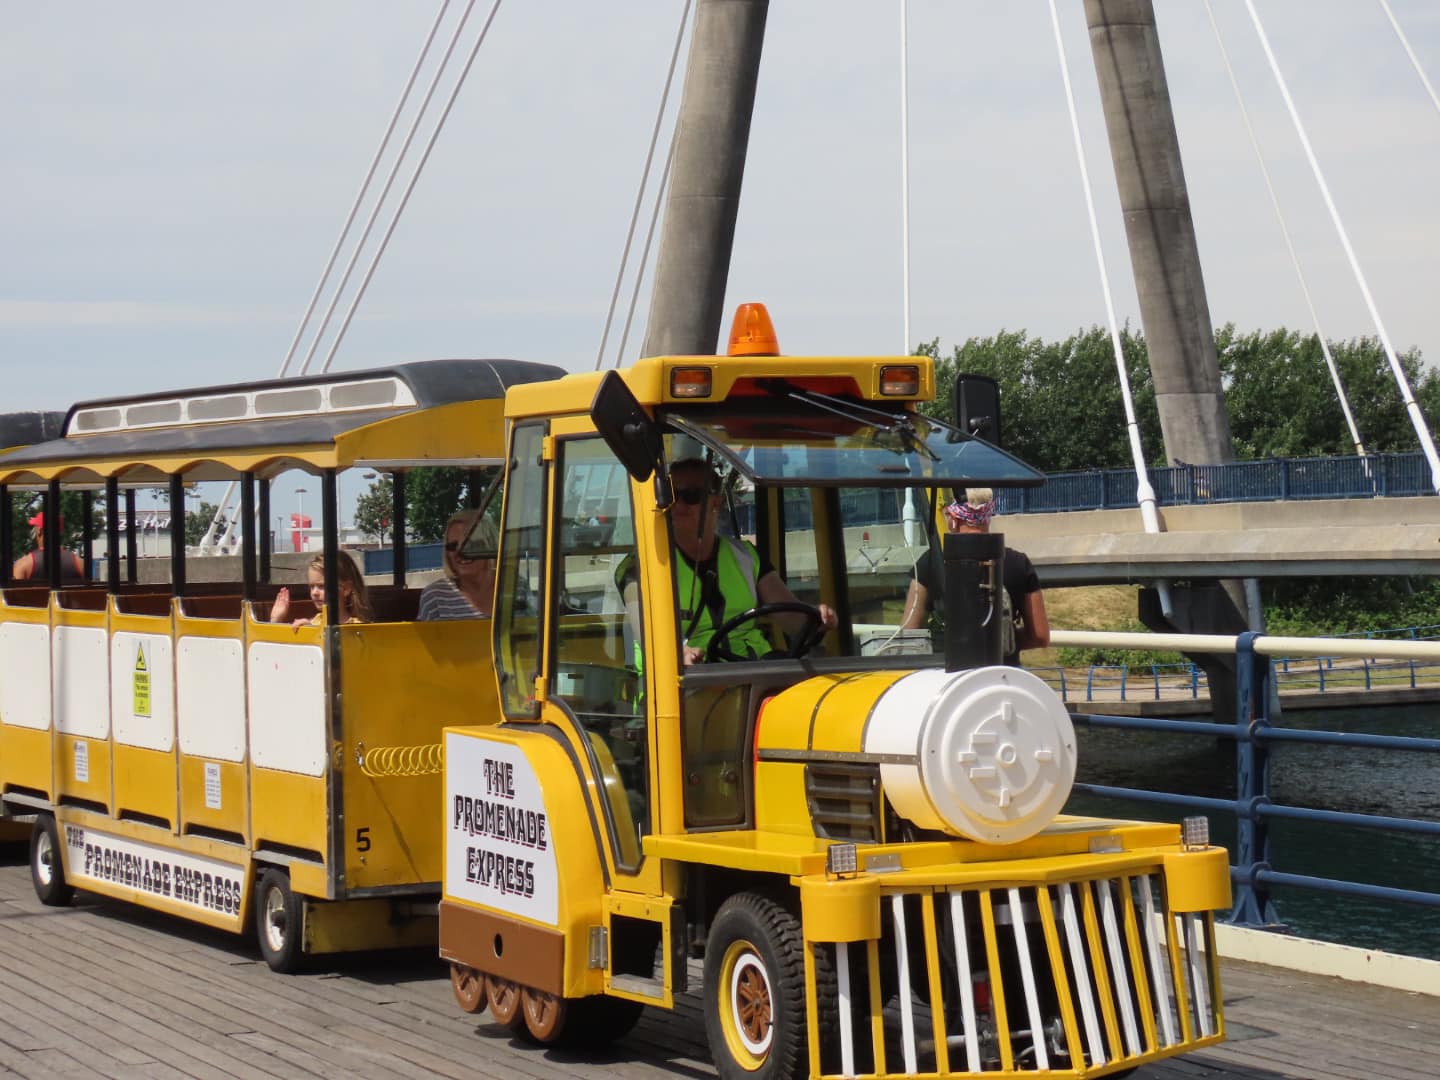 The road train at Southport Pier. Photo by Andrew Brown Media